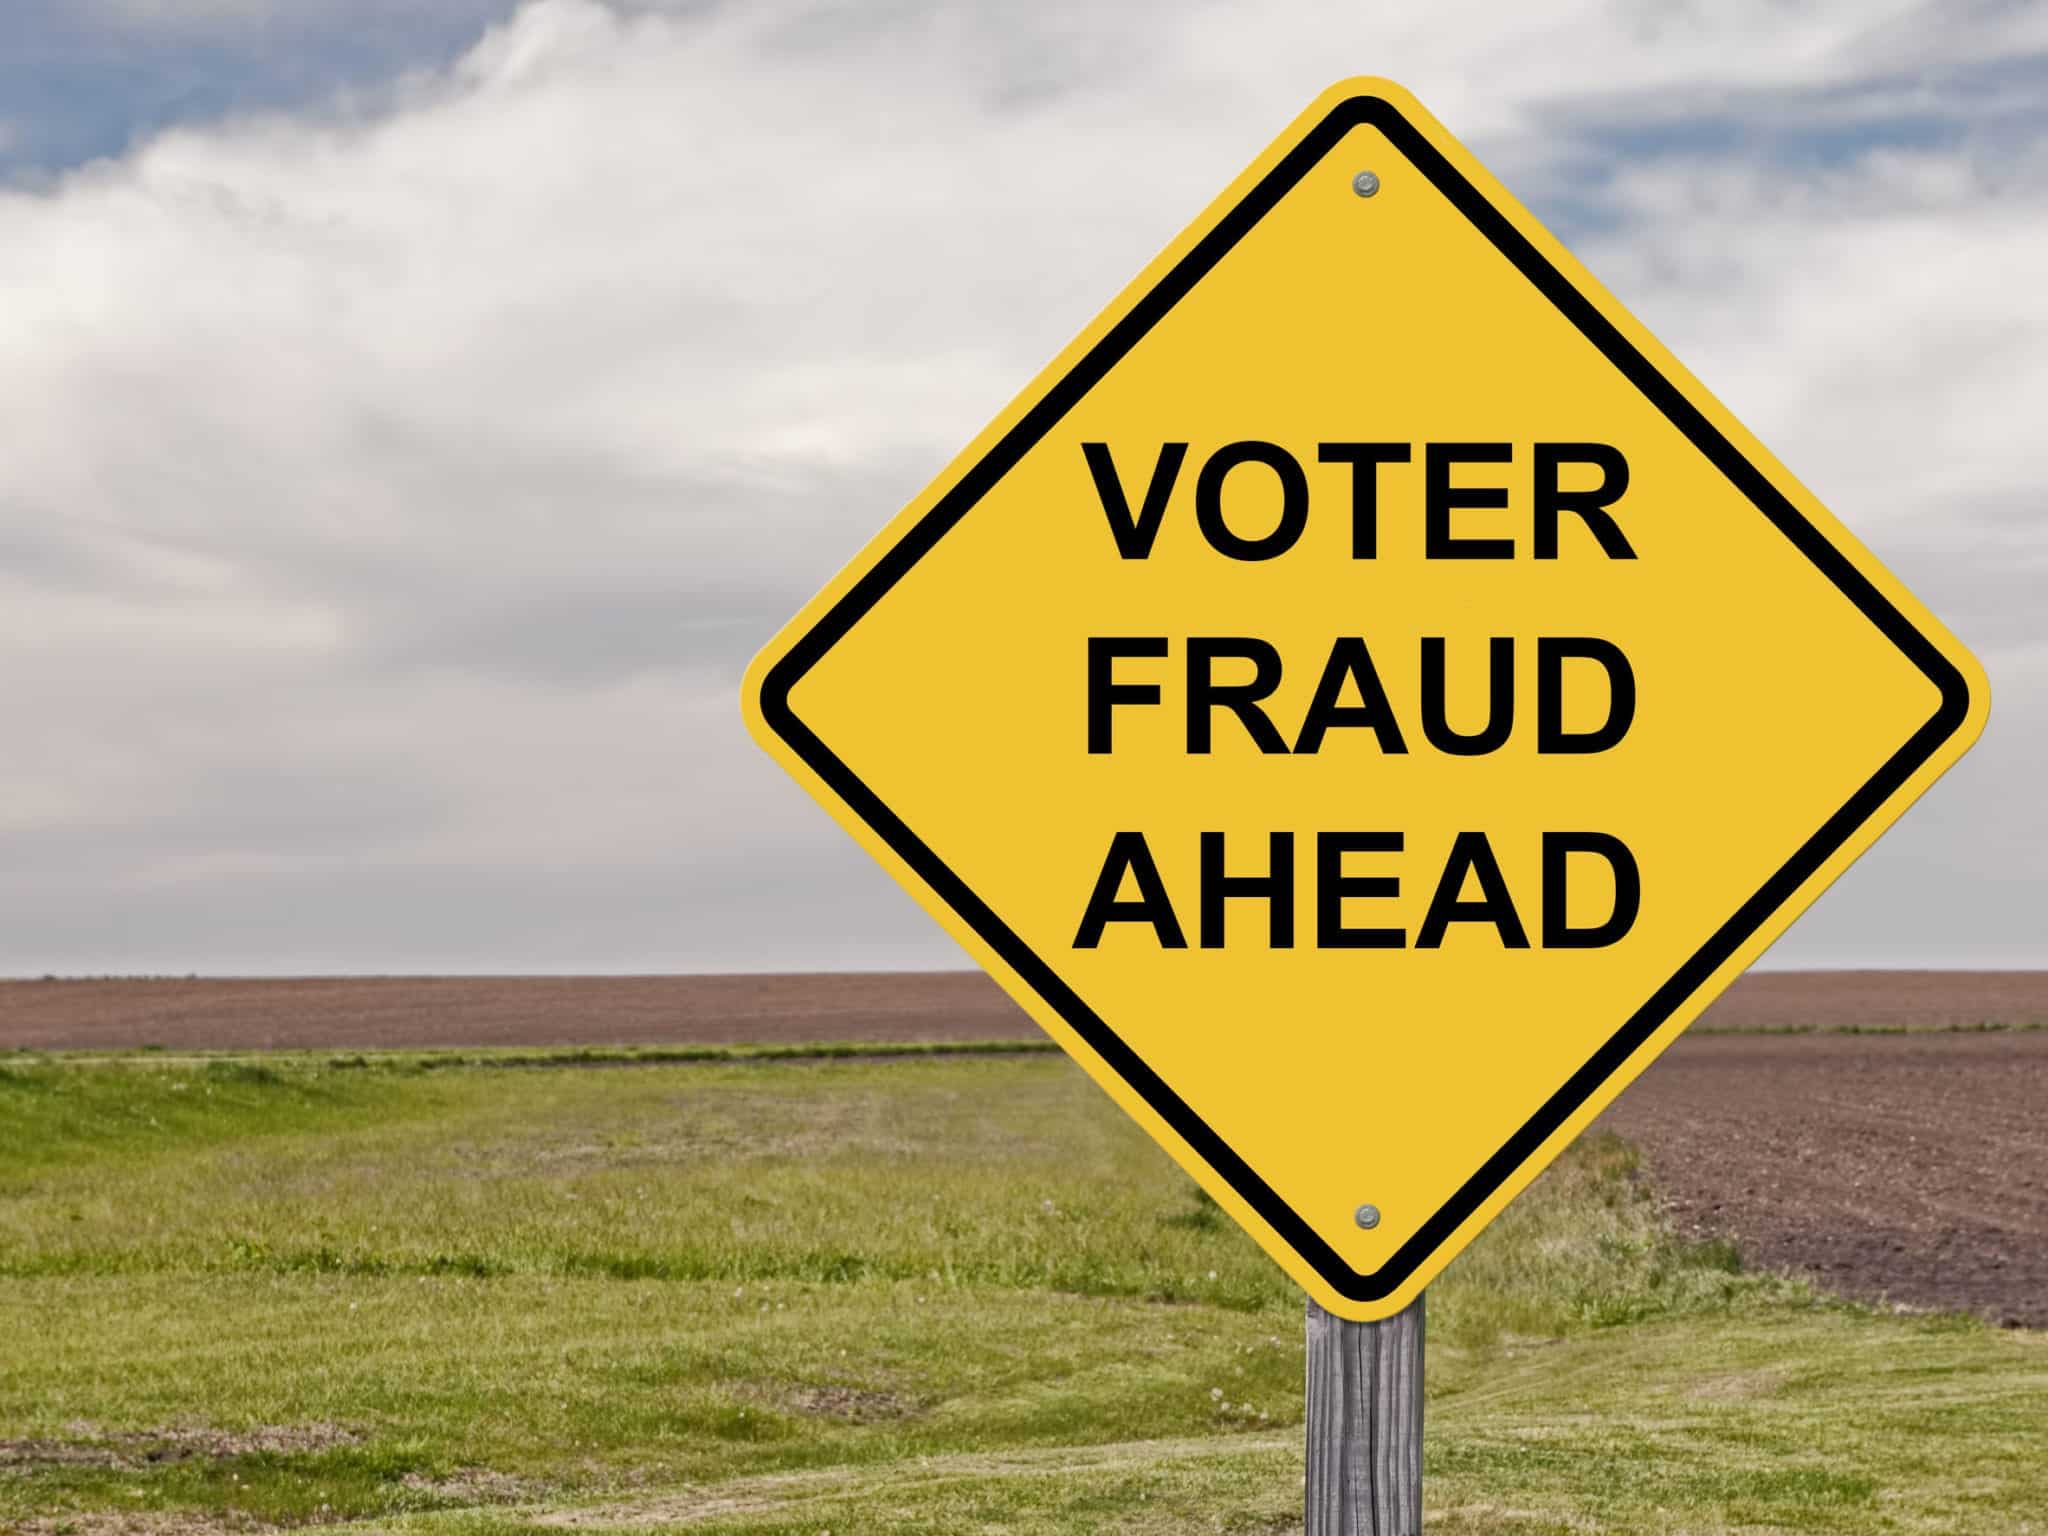 False Accusations and the Rarity of Voter Fraud